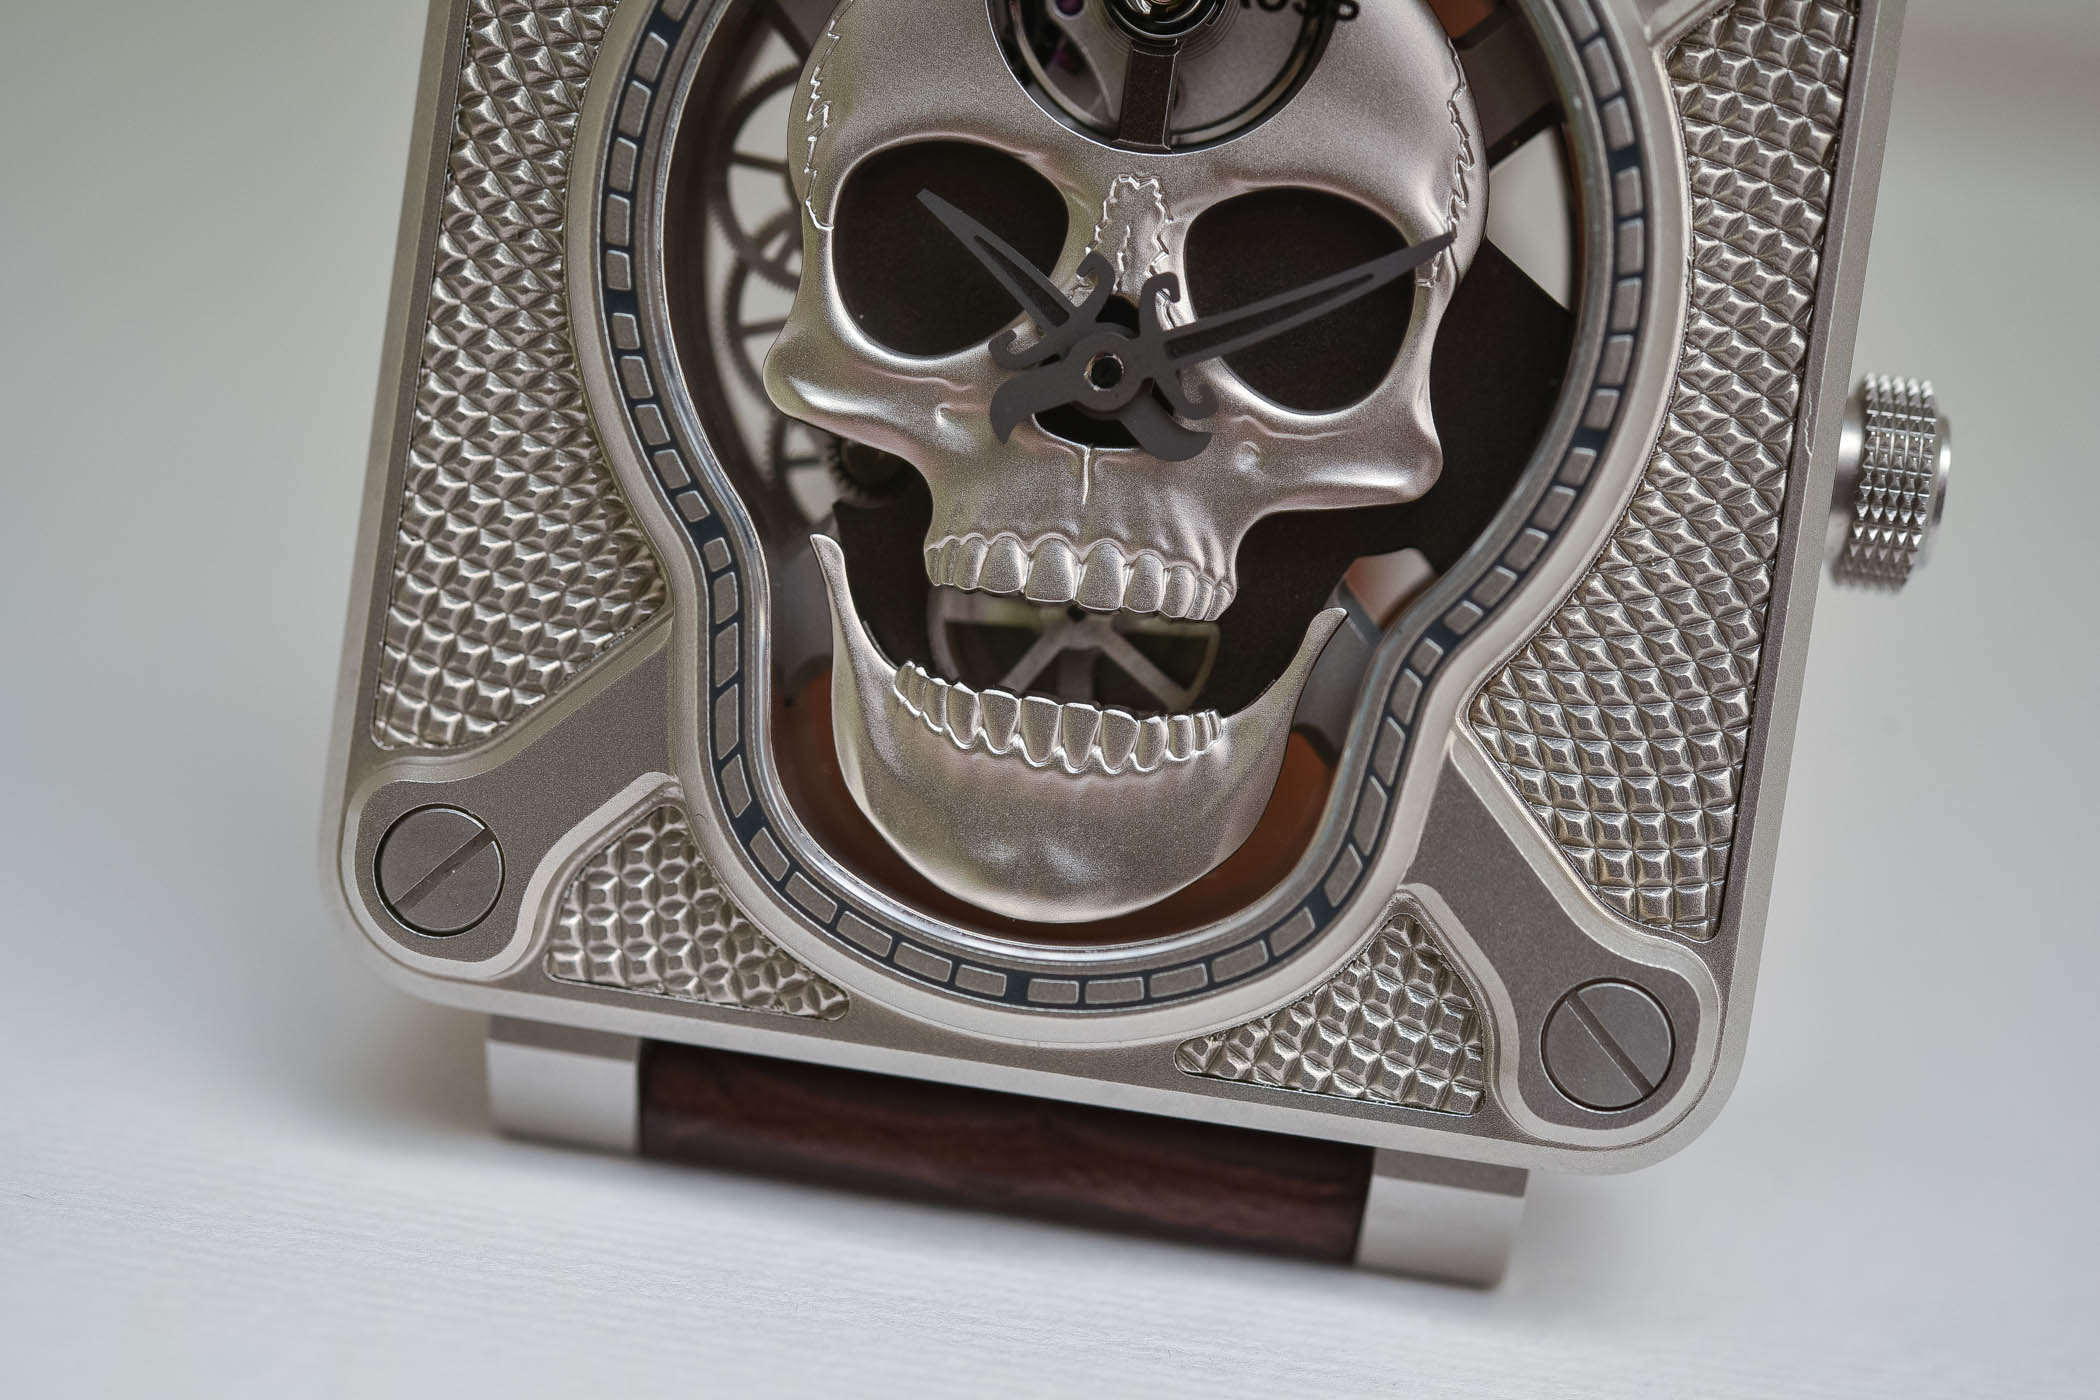 Bell and Ross BR-01 Laughing Skull